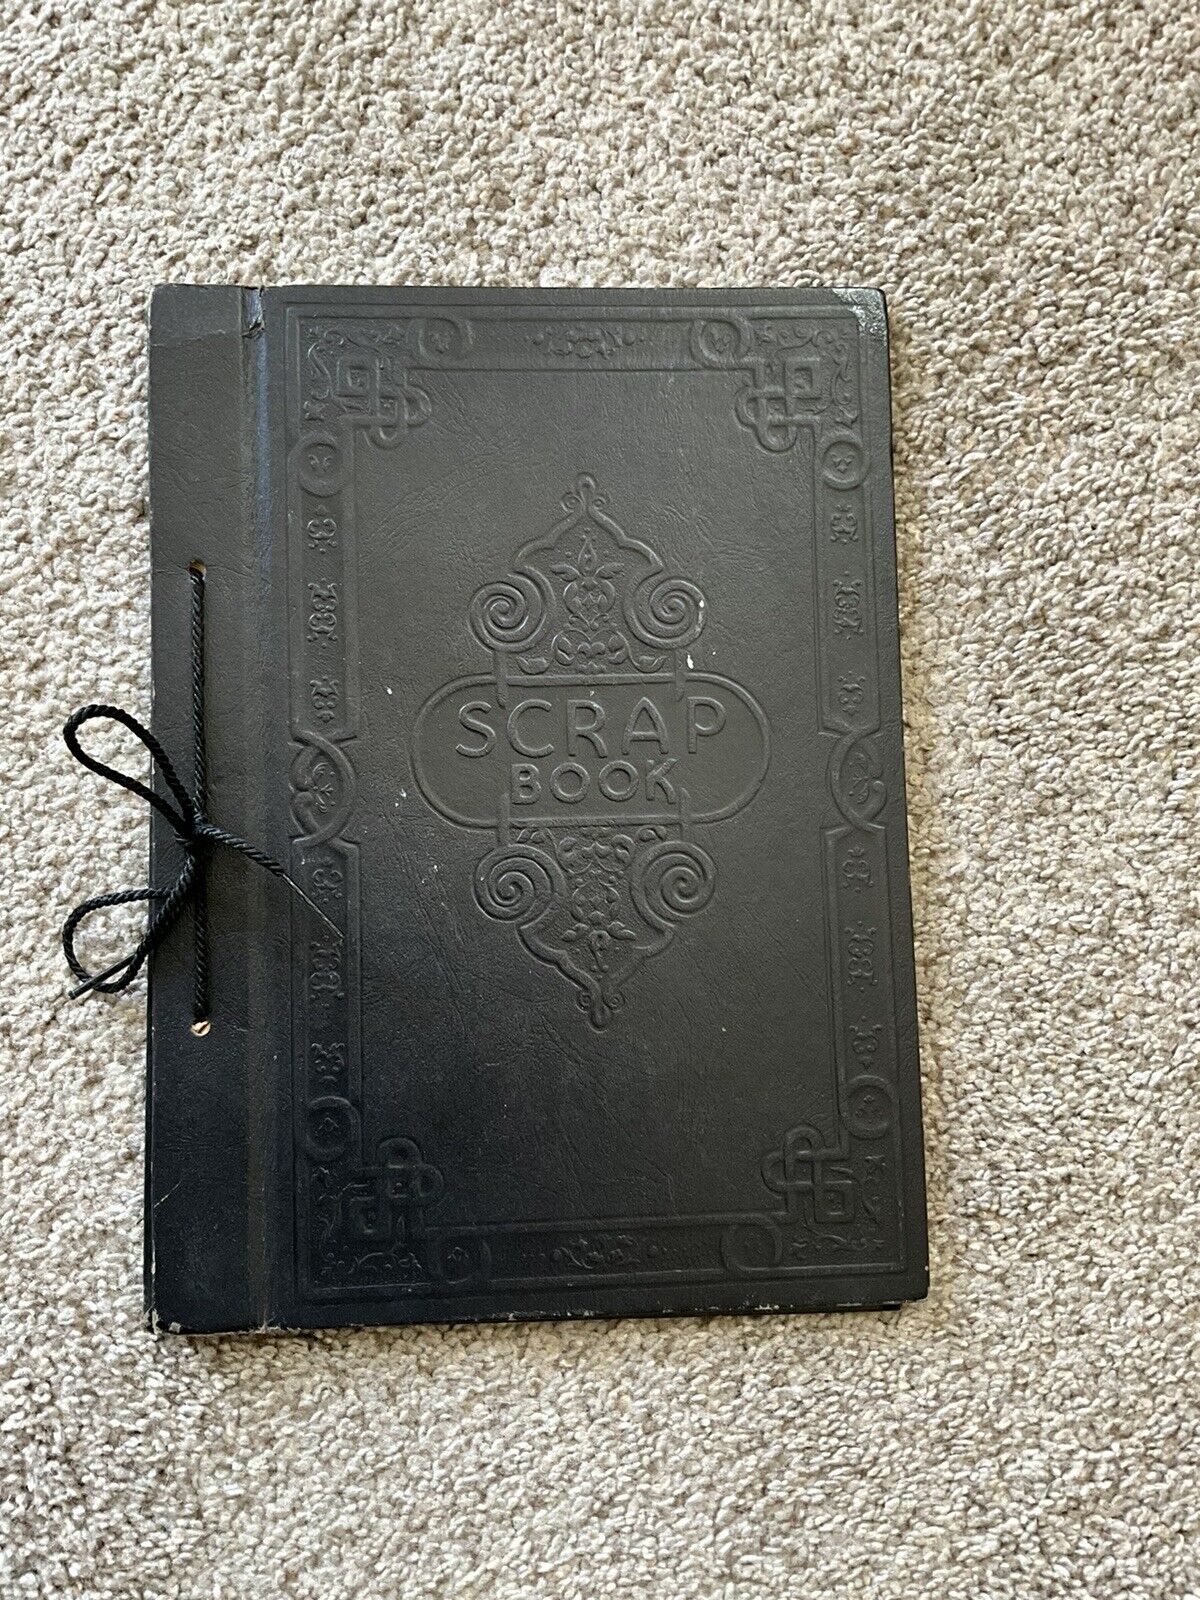 Vintage Scrapbook From Early 1900S and metropolitan life record keeper